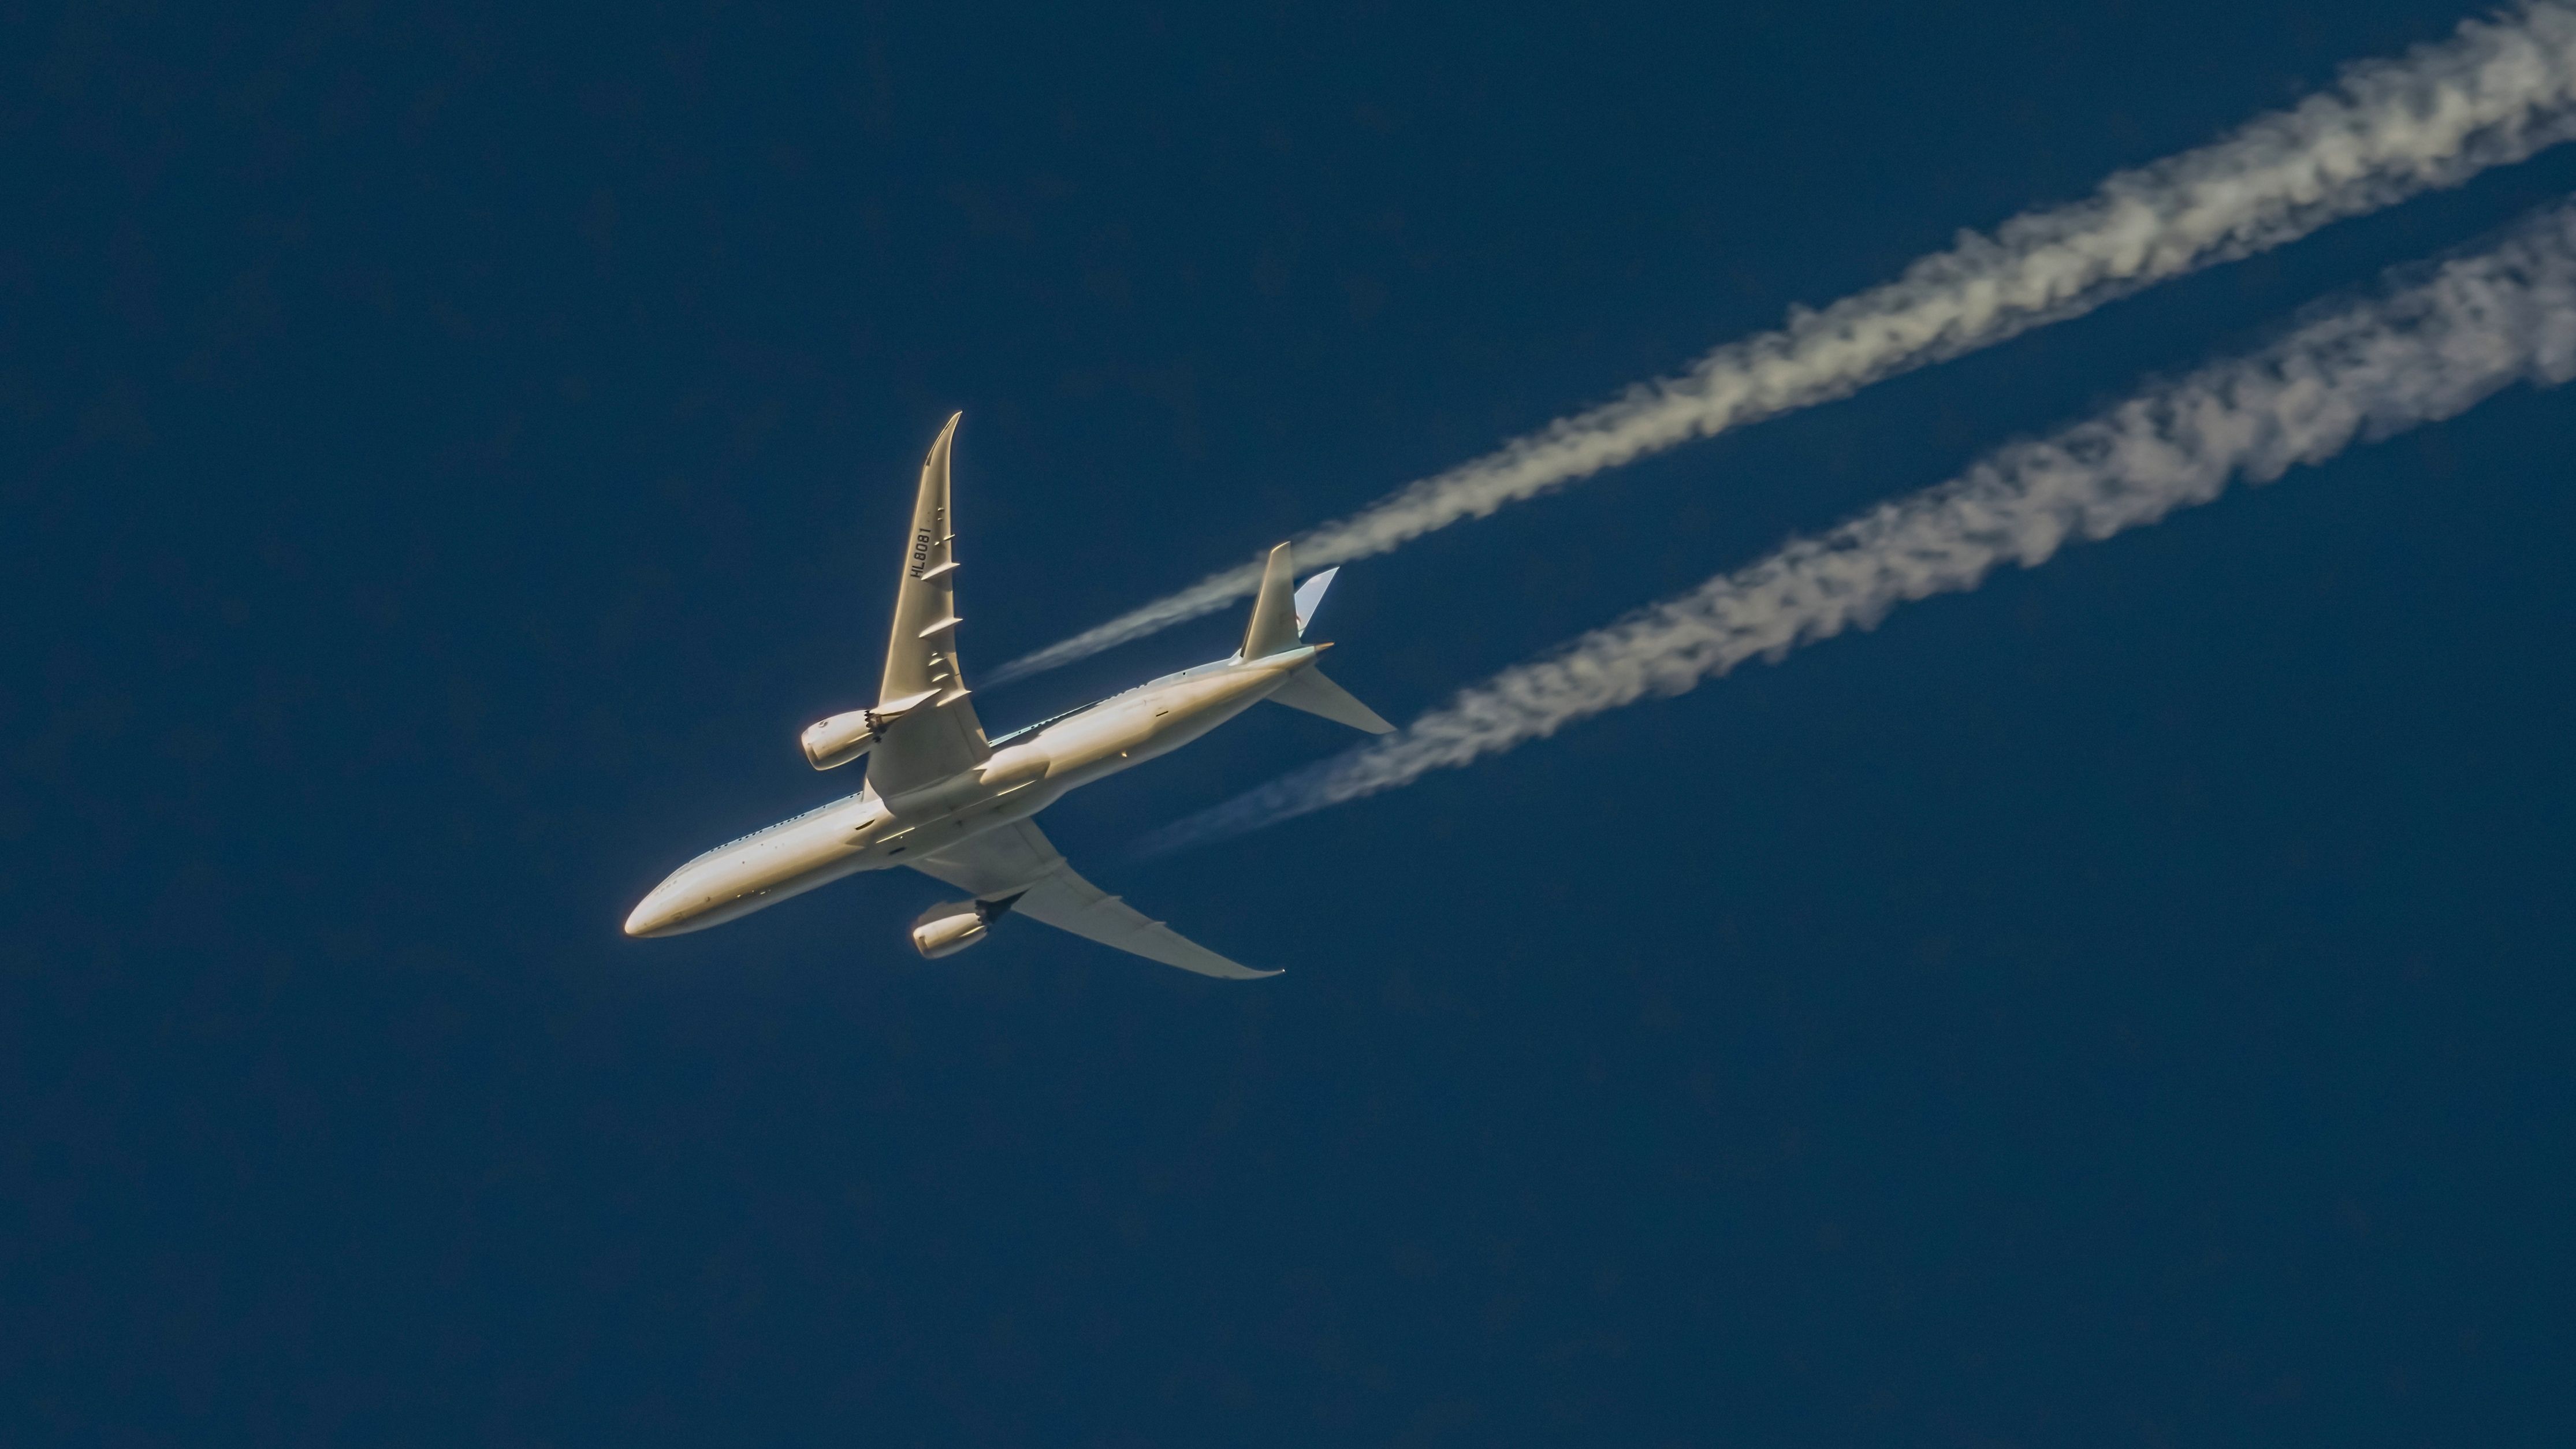 A Boeing 787 leaving contrails behind it.